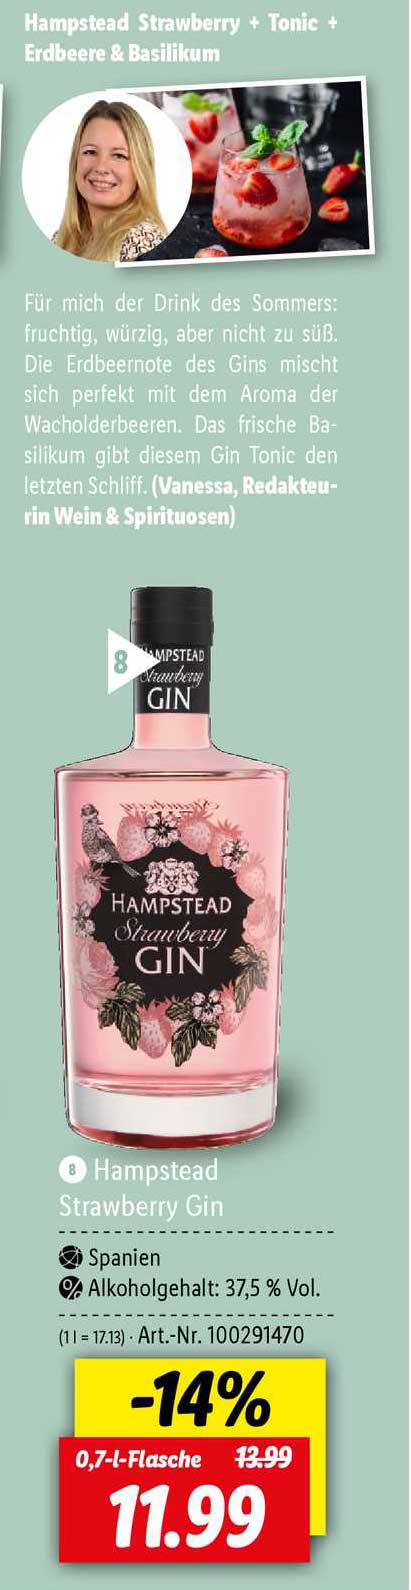 Gin Hampstead Strawberry bei Angebot Lidl